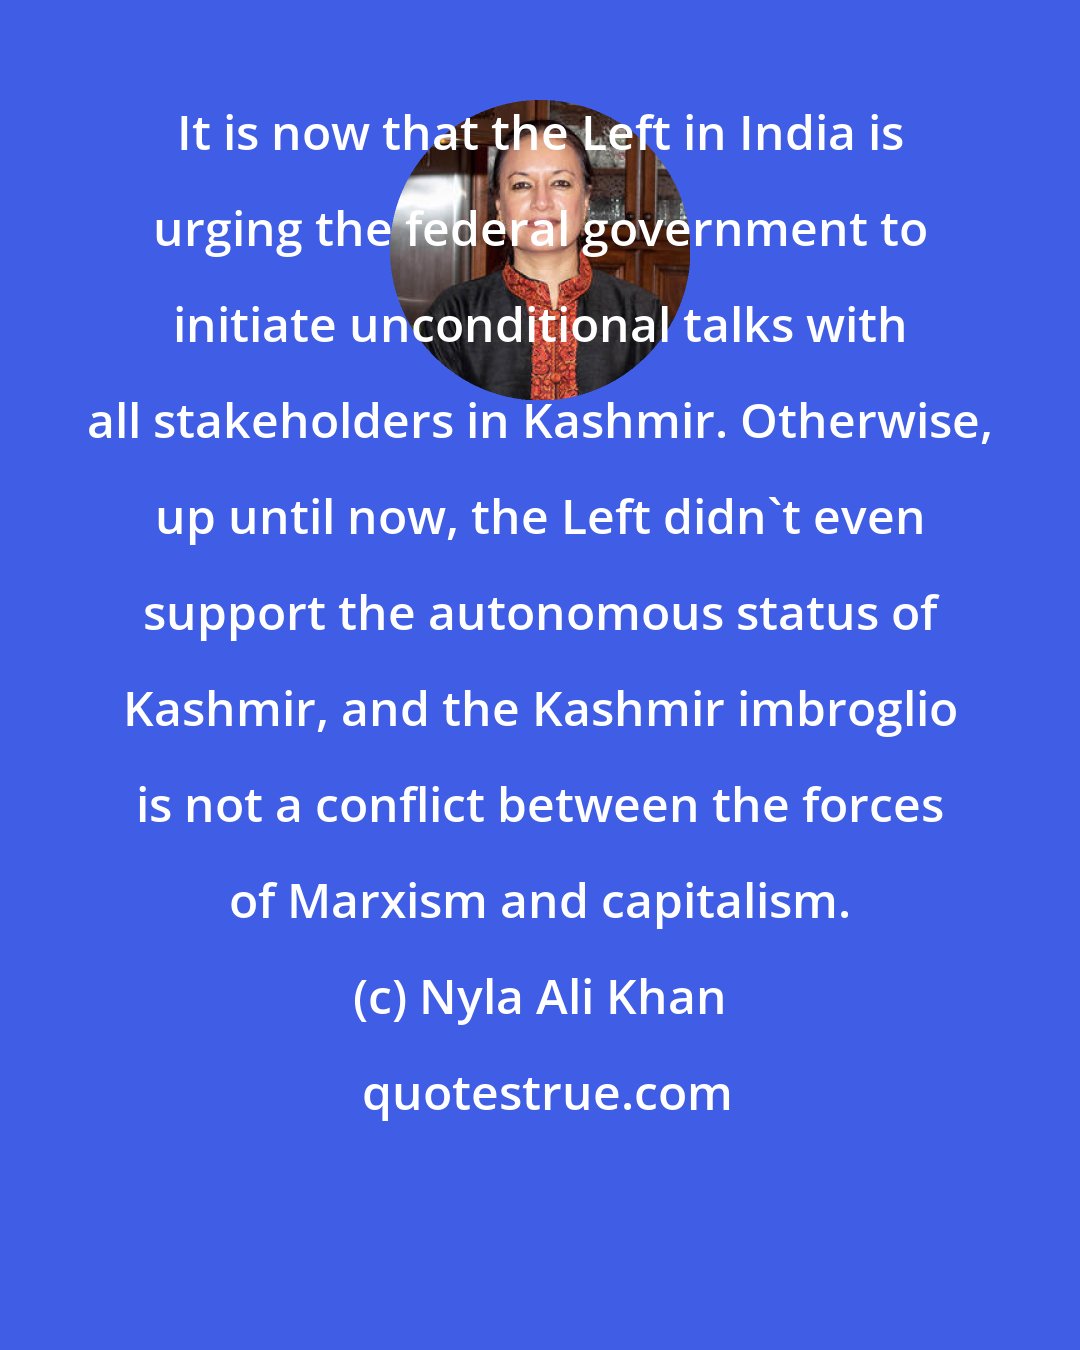 Nyla Ali Khan: It is now that the Left in India is urging the federal government to initiate unconditional talks with all stakeholders in Kashmir. Otherwise, up until now, the Left didn't even support the autonomous status of Kashmir, and the Kashmir imbroglio is not a conflict between the forces of Marxism and capitalism.